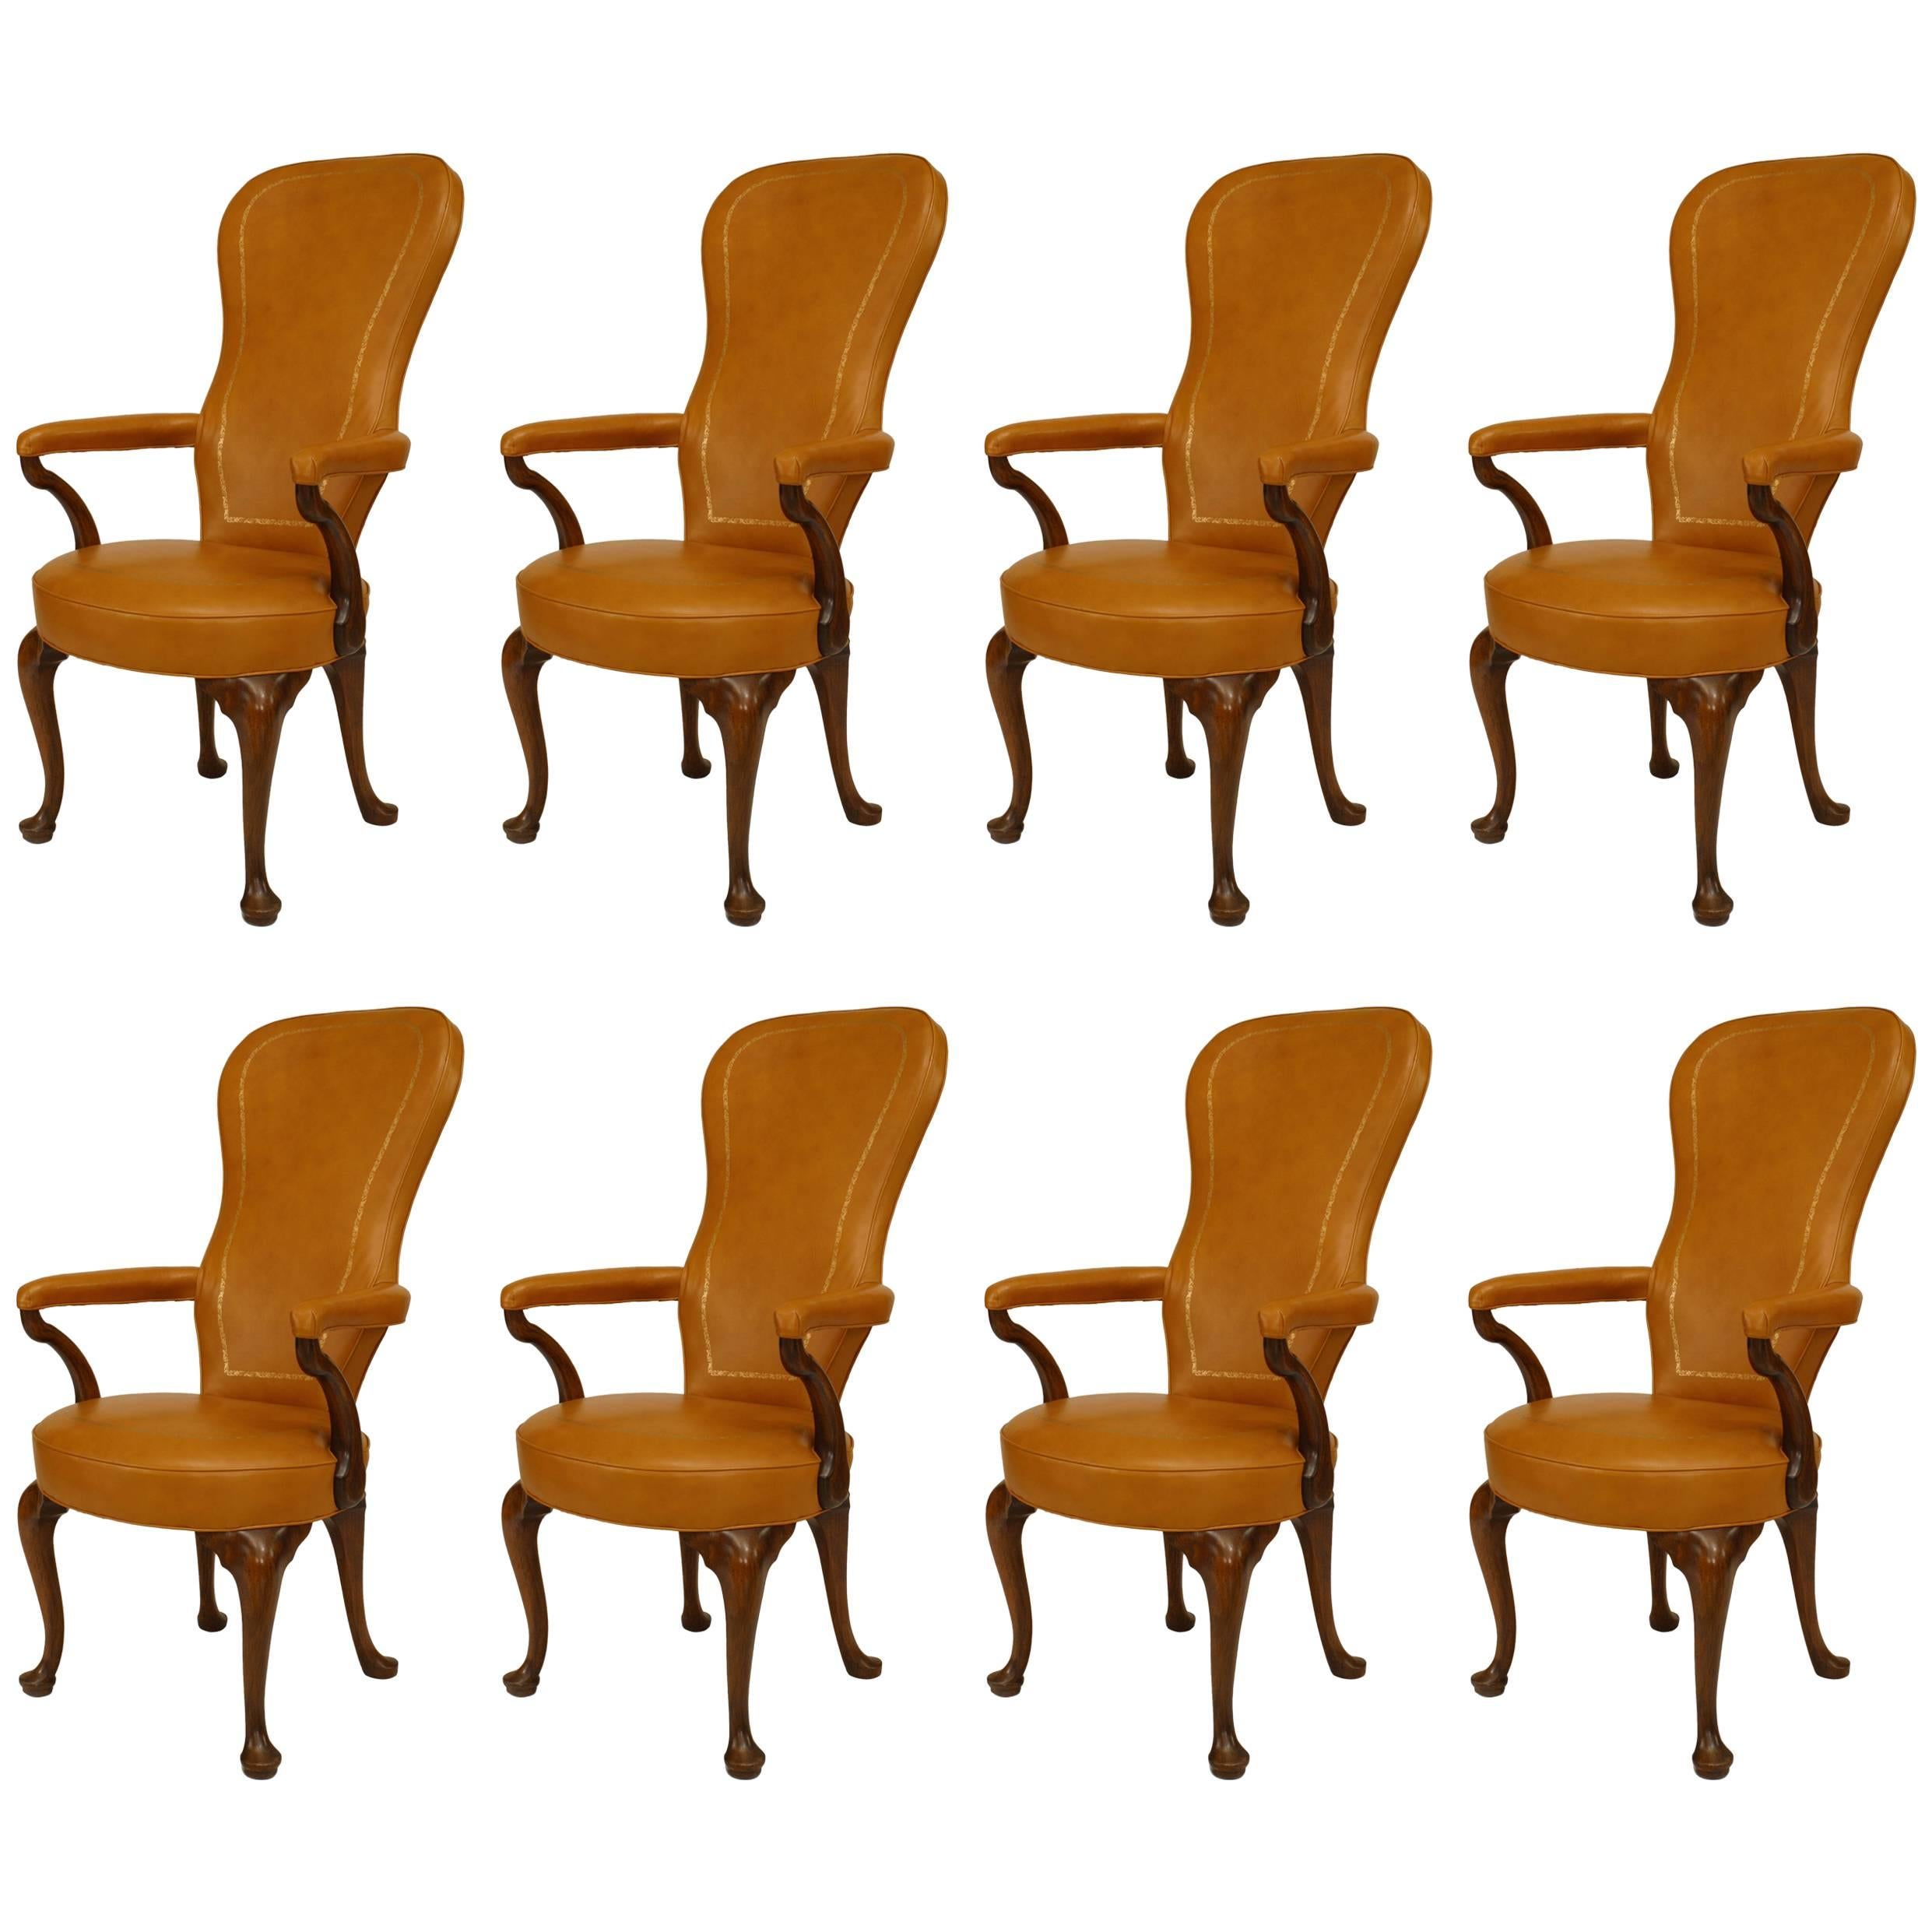 Set of 8 Queen Anne Style Leather High Back Arm Chair